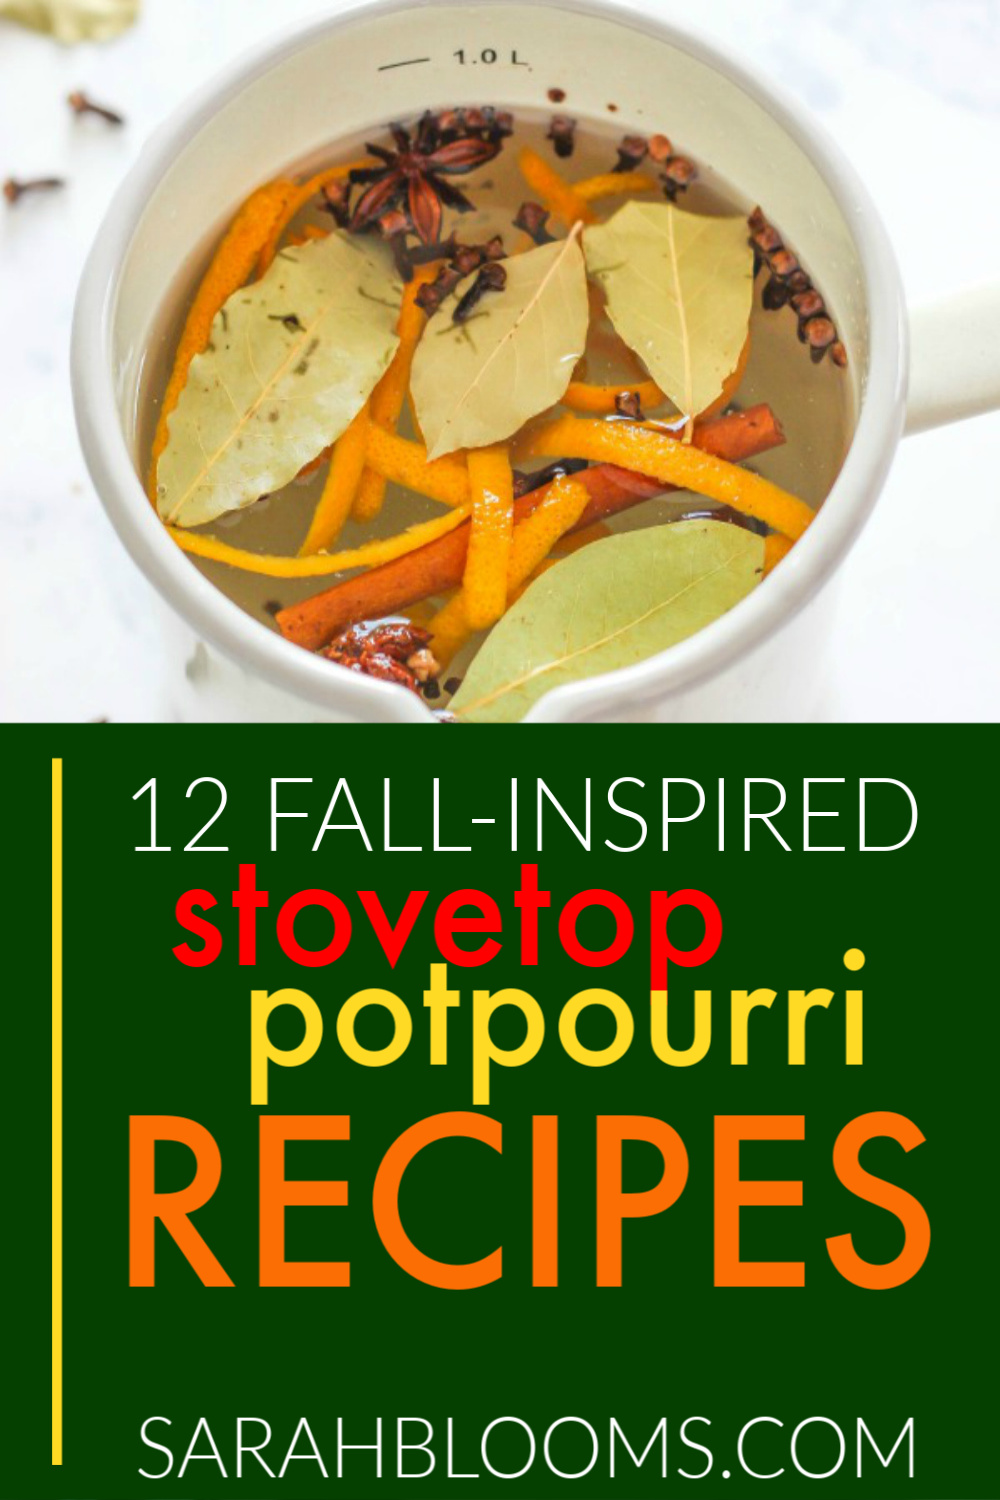 Looking for simmering potpourri recipes for fall? Look no farther! Here are some of our favorite simmer pot recipes guaranteed to make your home smell absolutely amazing for fall. Click this pin to get best fall-inspired potpourri simmer pot scents. #fall #fallhome #homescents #homescenthacks #potpourri #farmhousestyle #simmeringpotpouri #simmerpots #stovetoppotpourri #SarahBlooms